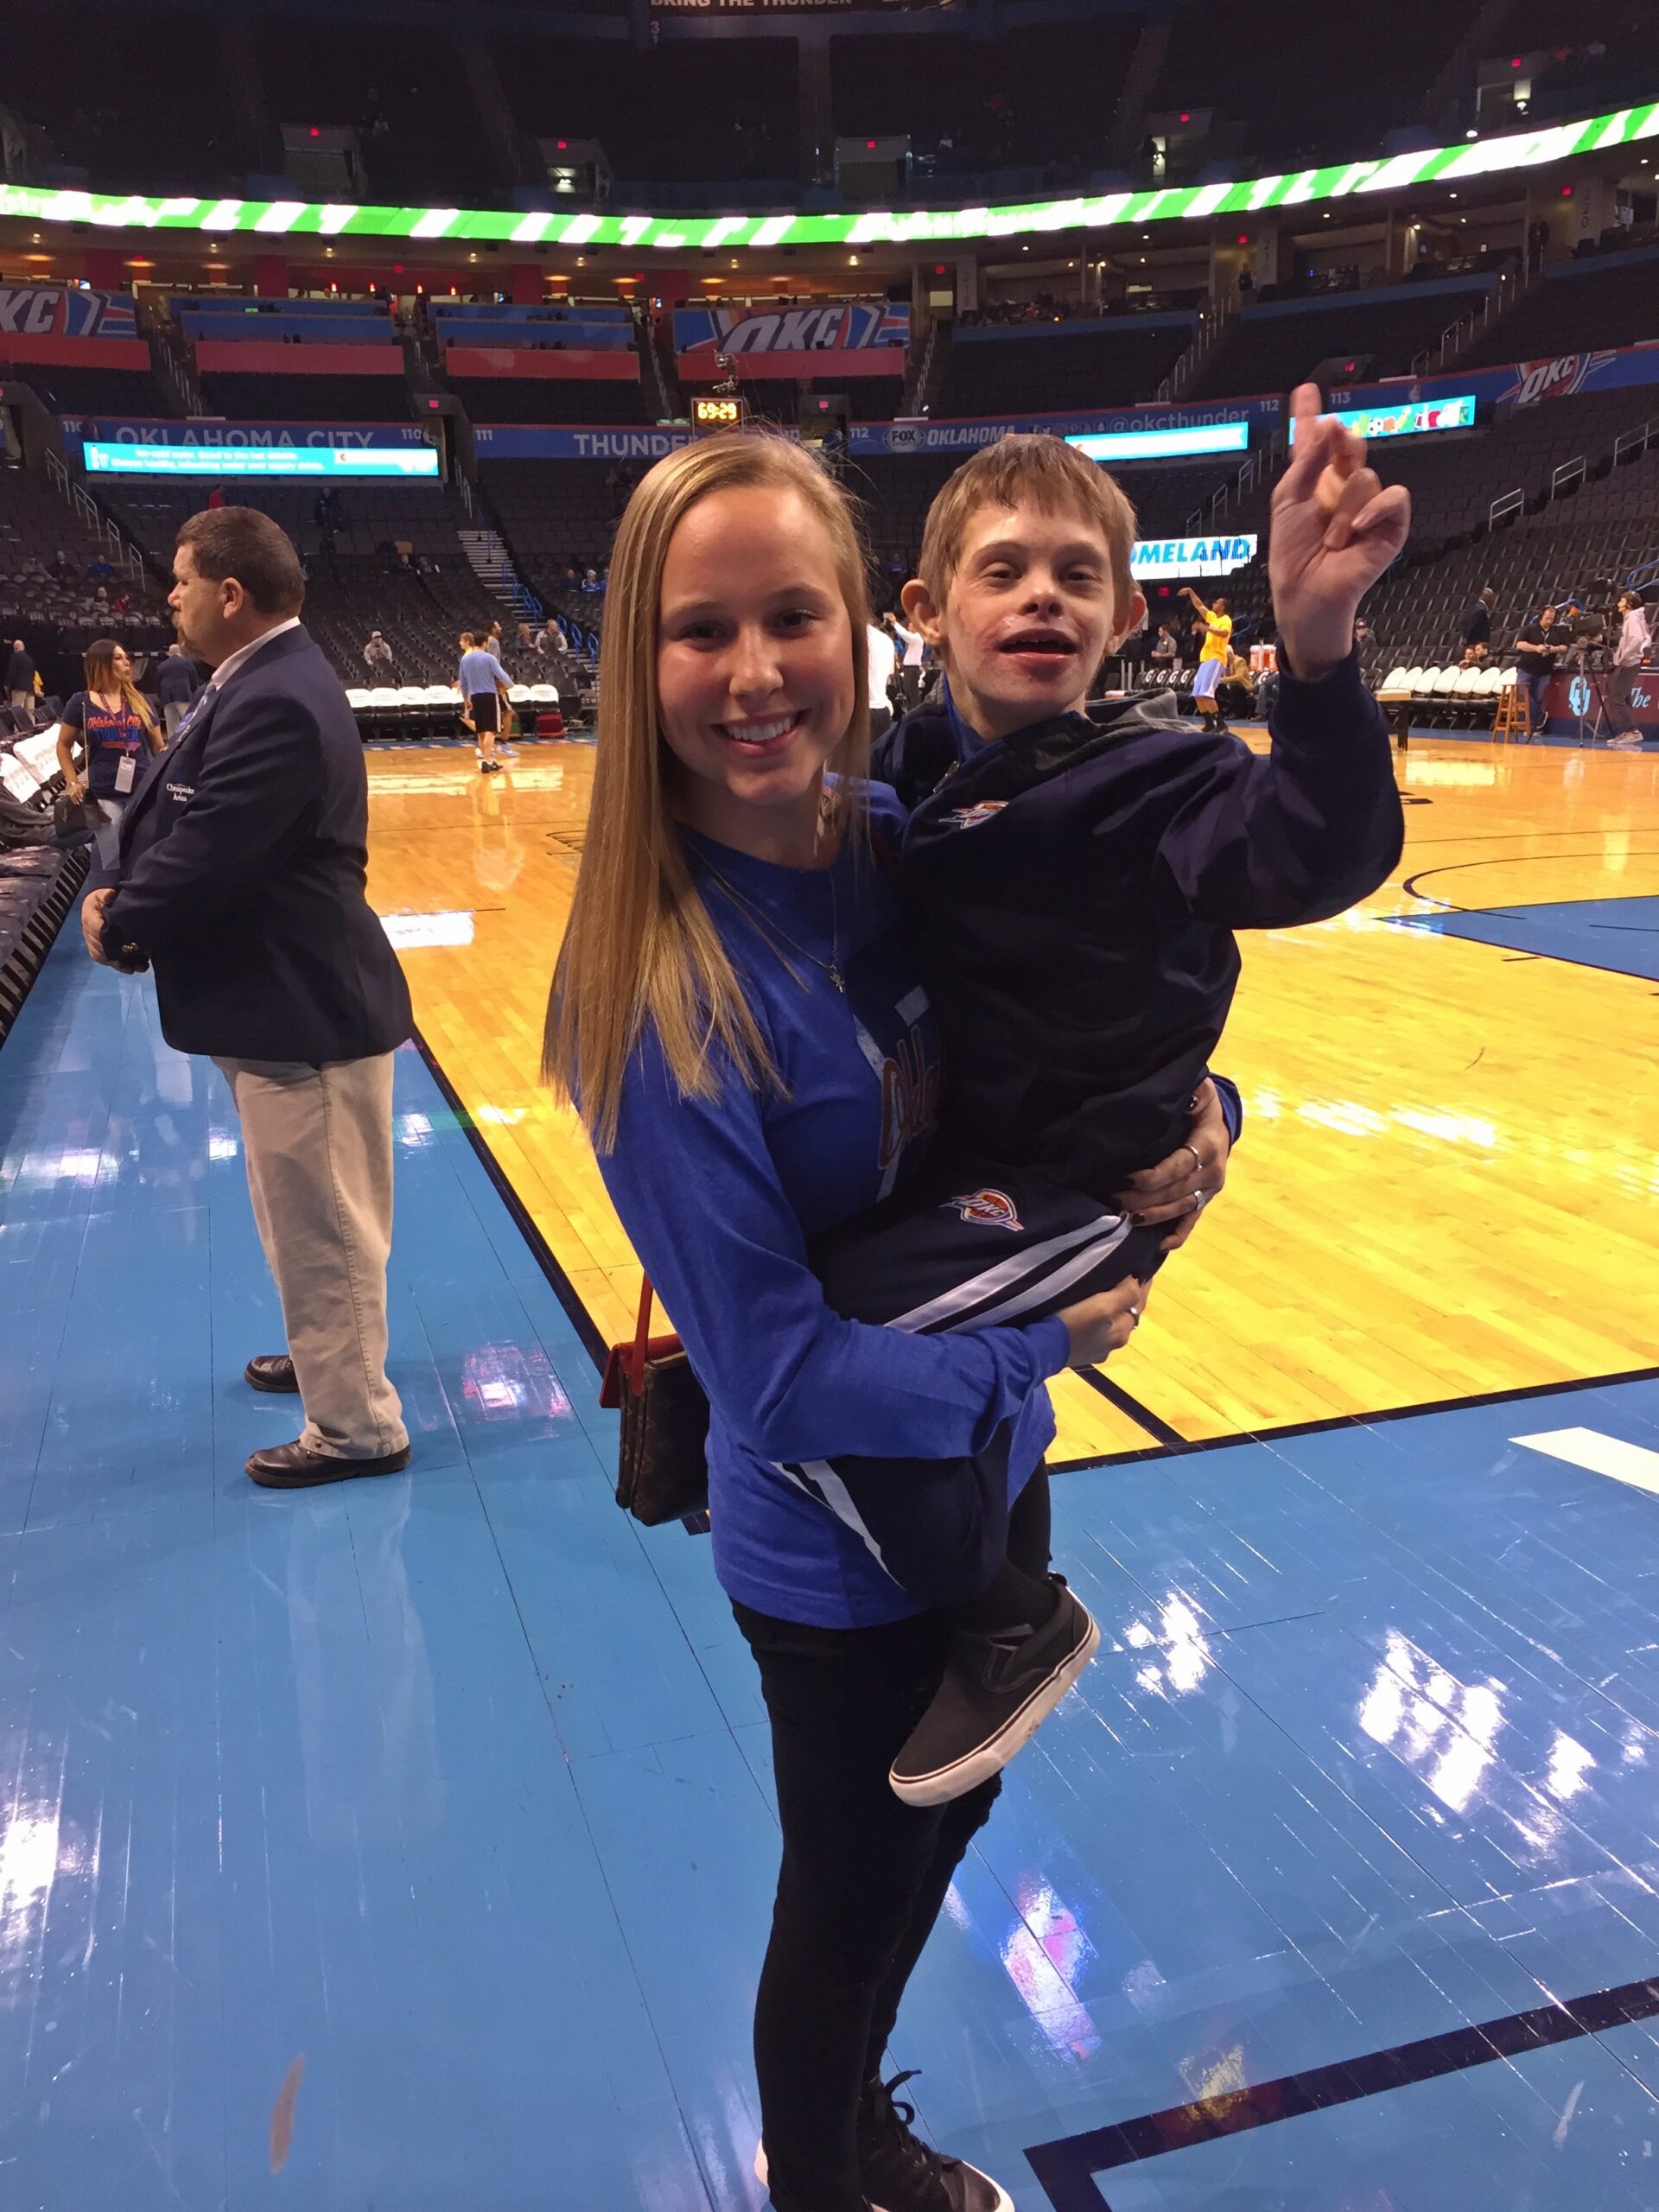 Mackenzie and Clayton standing on the court at the Oklahoma City Thunder game